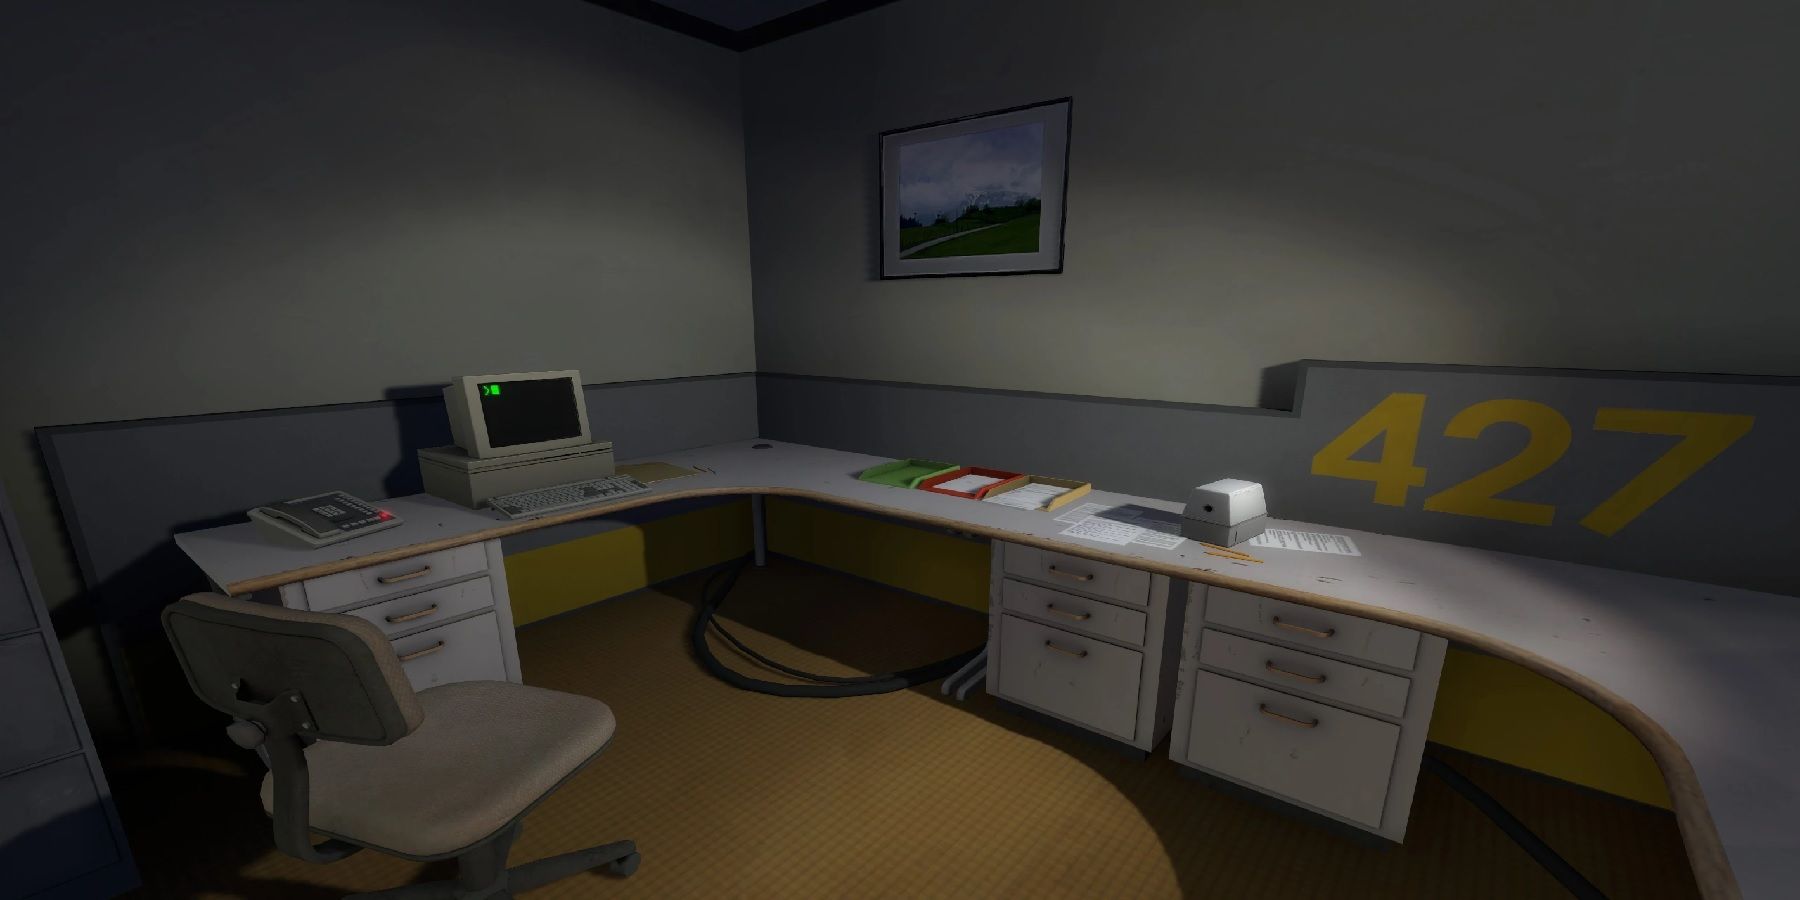 The Stanley Parable - Ultra Deluxe 427